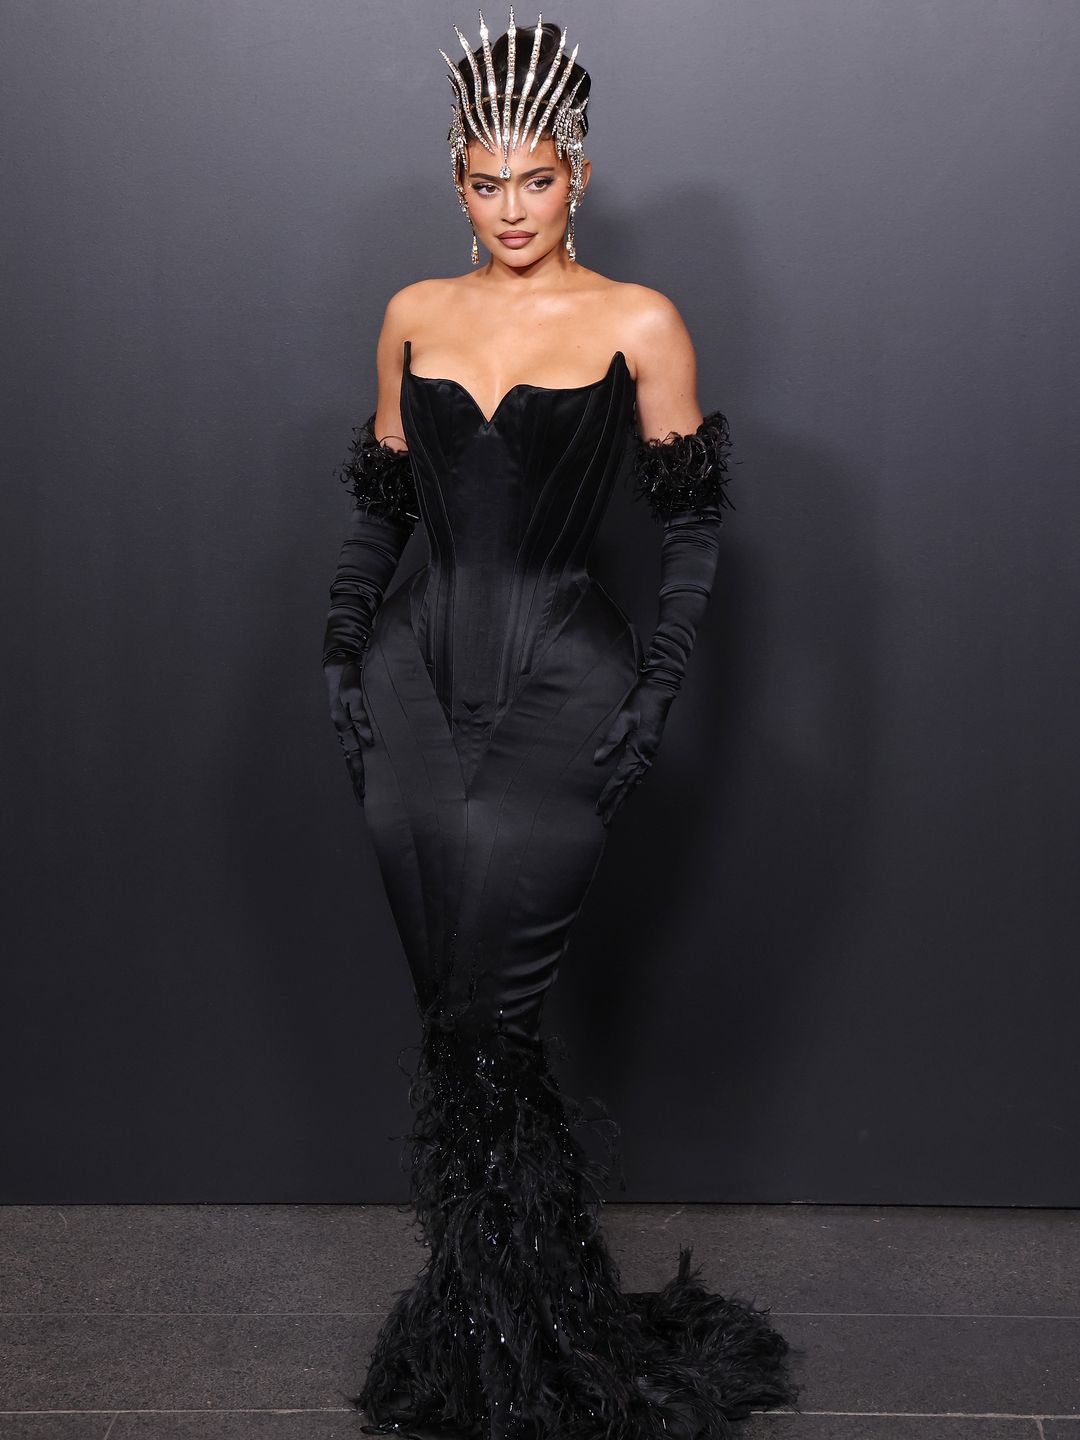 Kylie Jenner was giving gothic mermaid at the 'Thierry Mugler: Couturissime' exhibition opening 